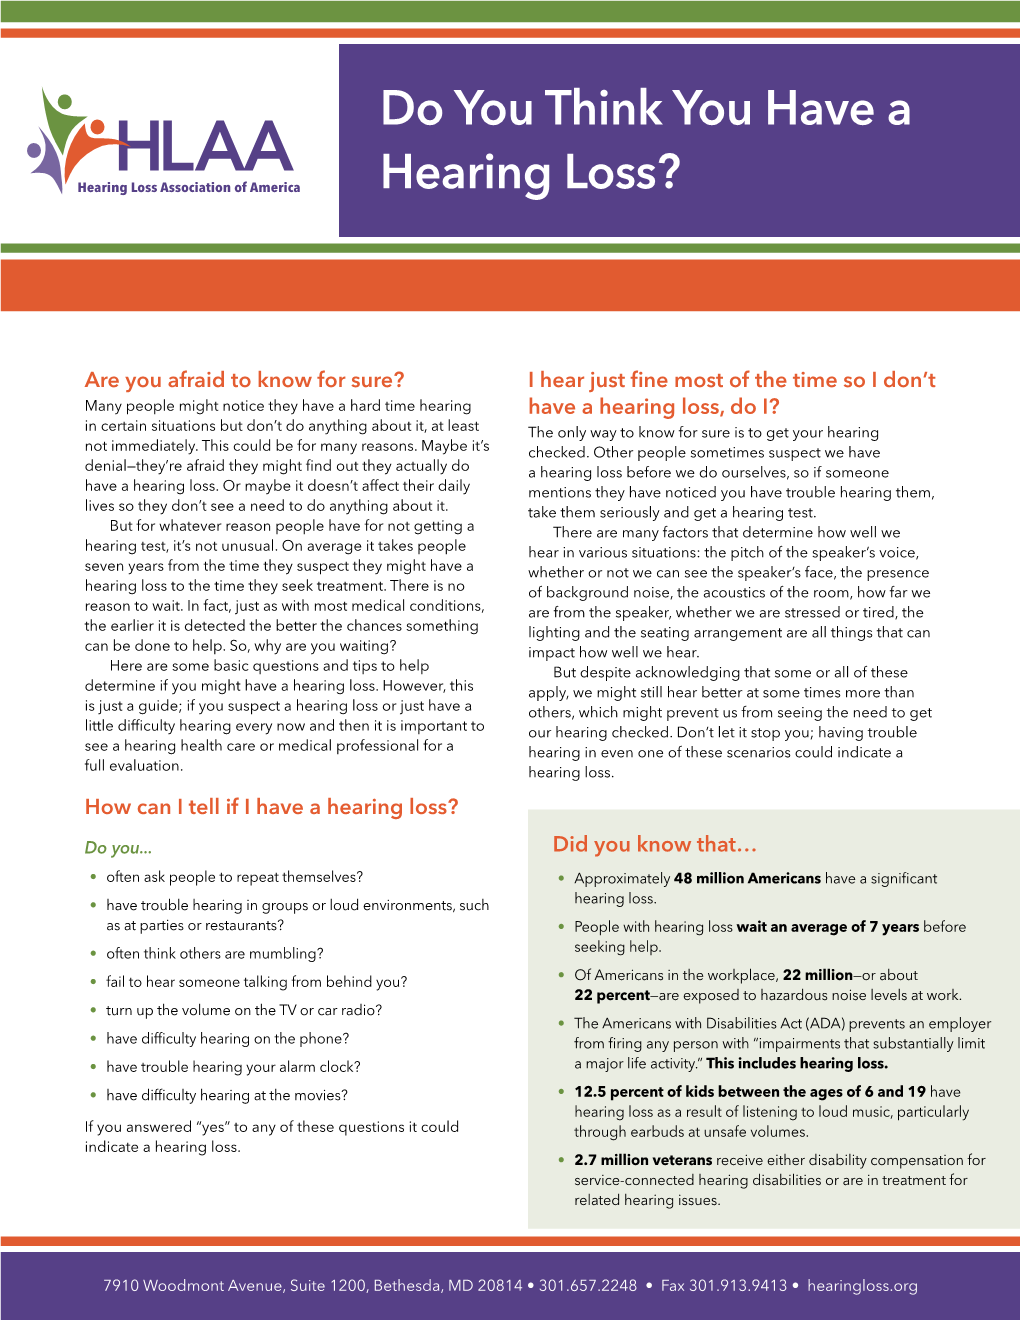 Do You Think You Have a Hearing Loss?